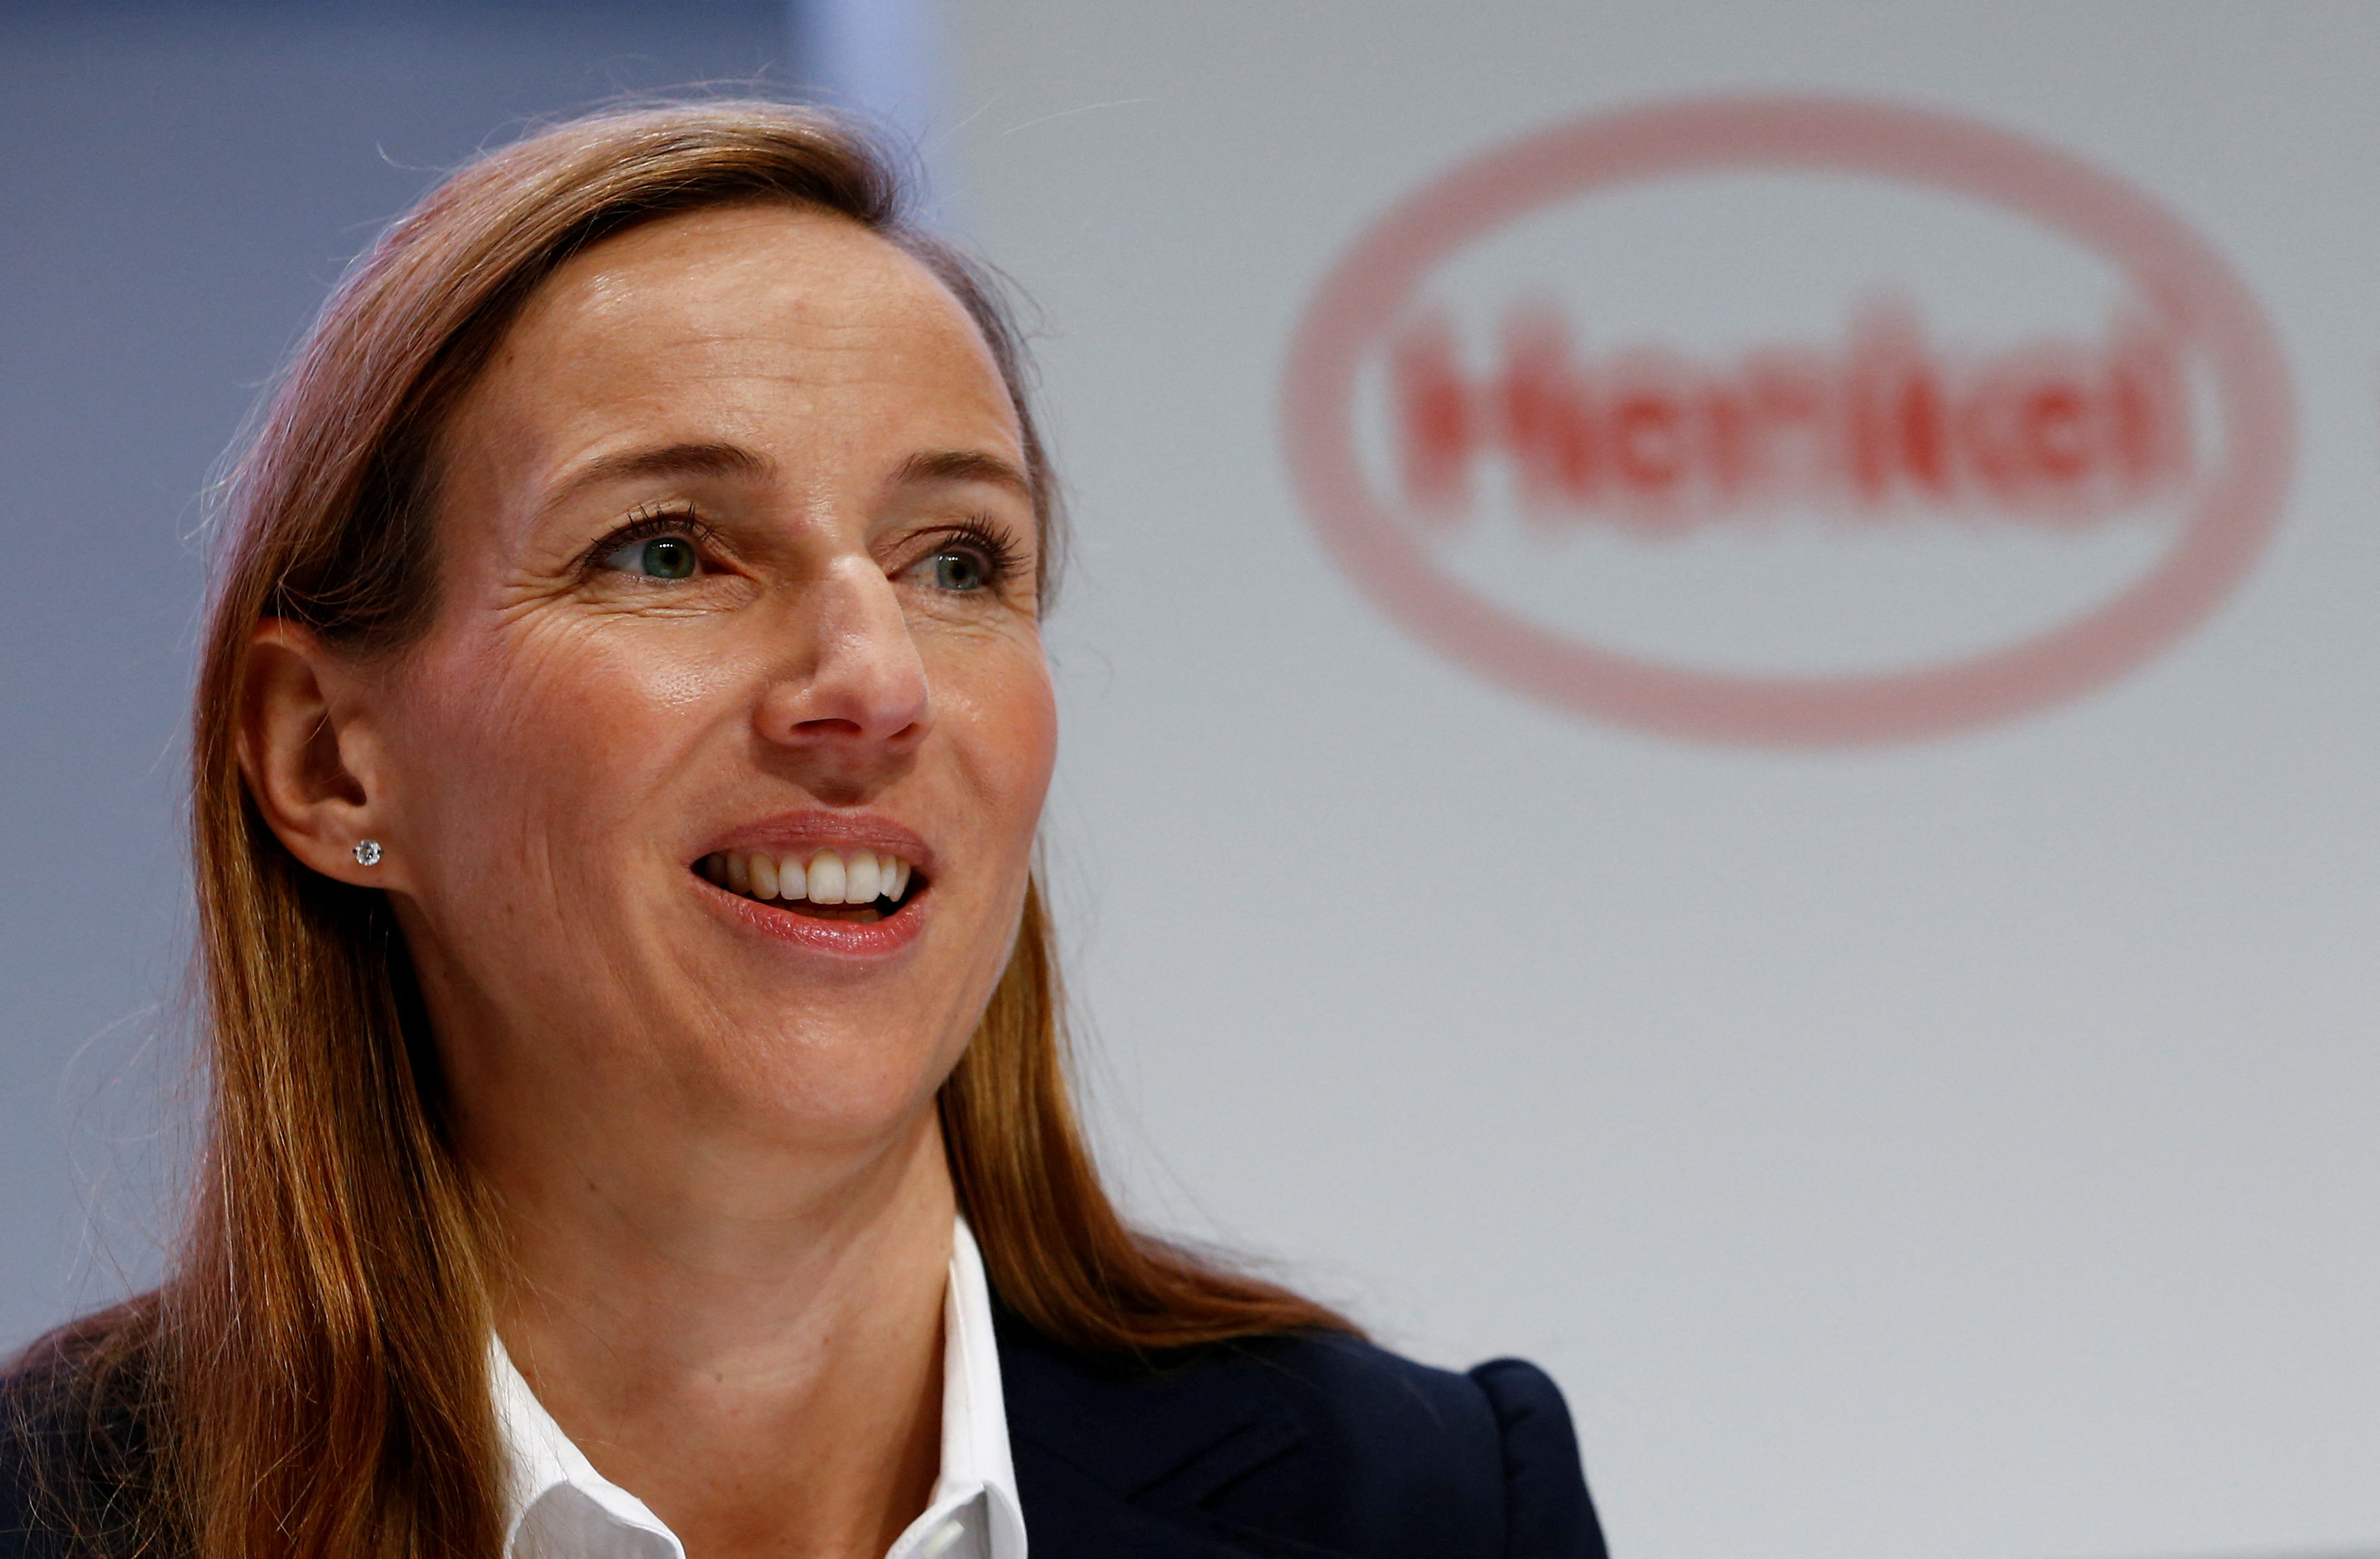 Henkel supervisory board leader Bagel-Trah is pictured at the company's AGM in Duesseldorf